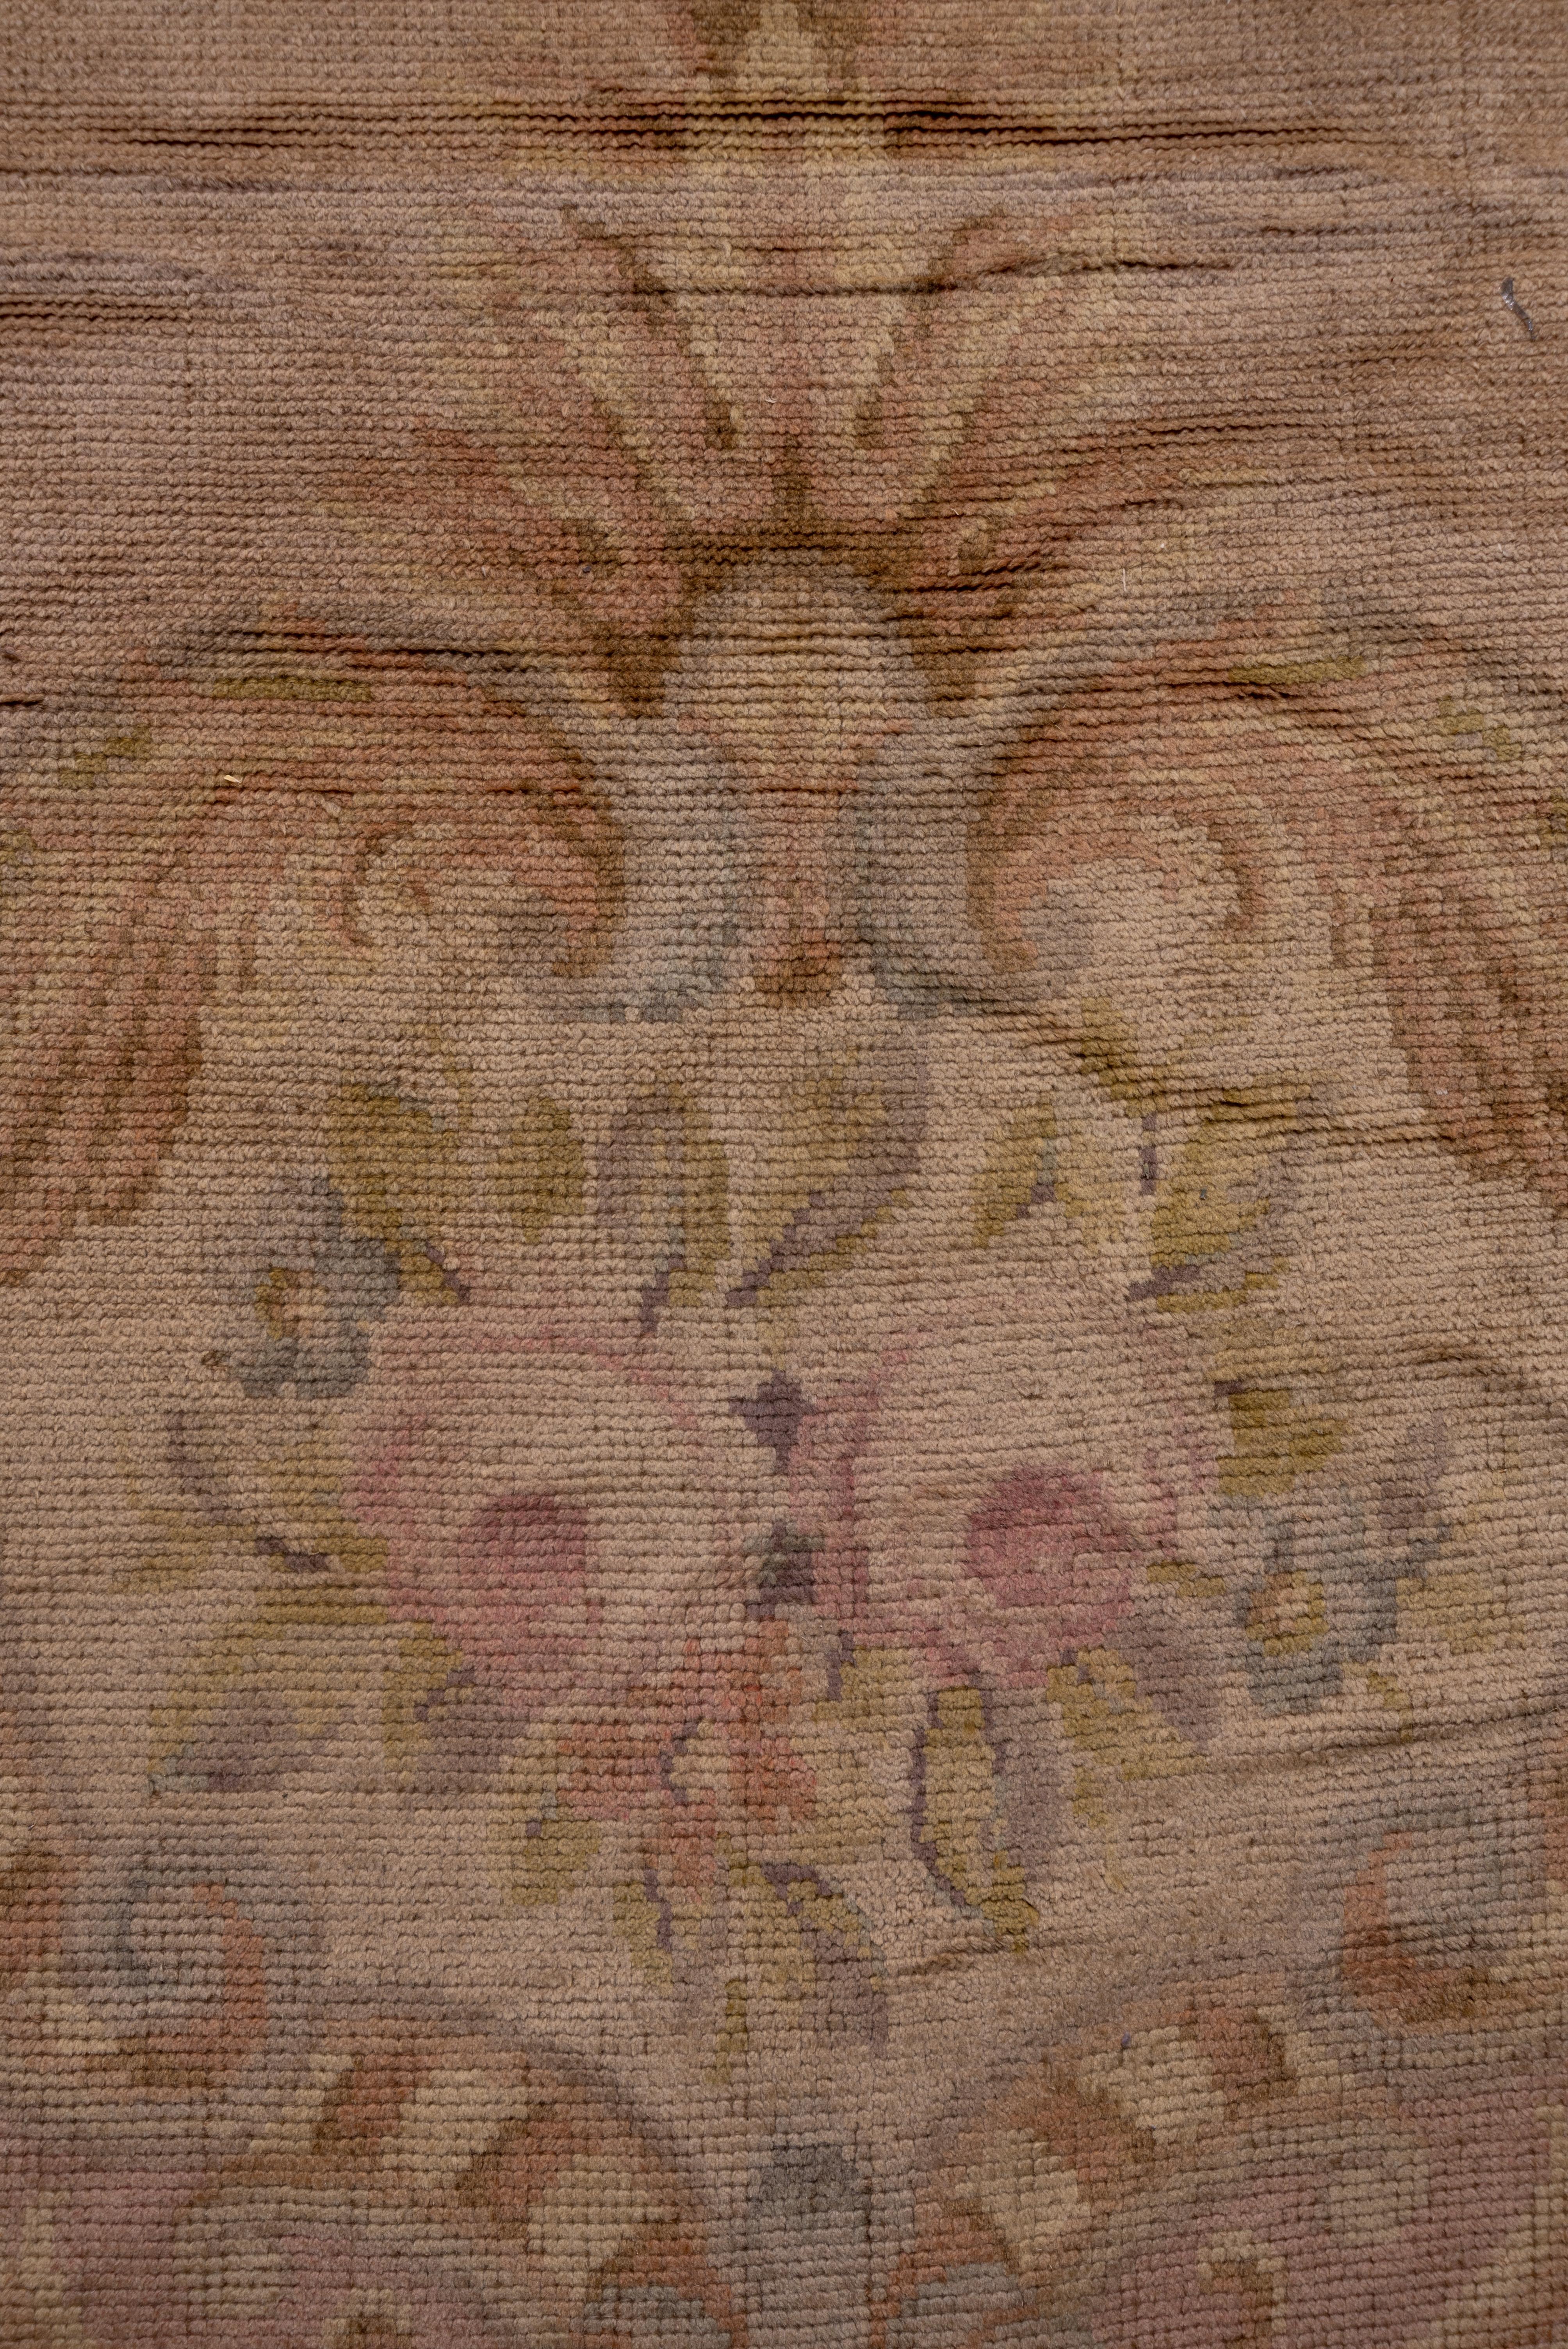 Antique French Savonnerie Mansion Carpet, Rococo Style, circa 1910s For Sale 4